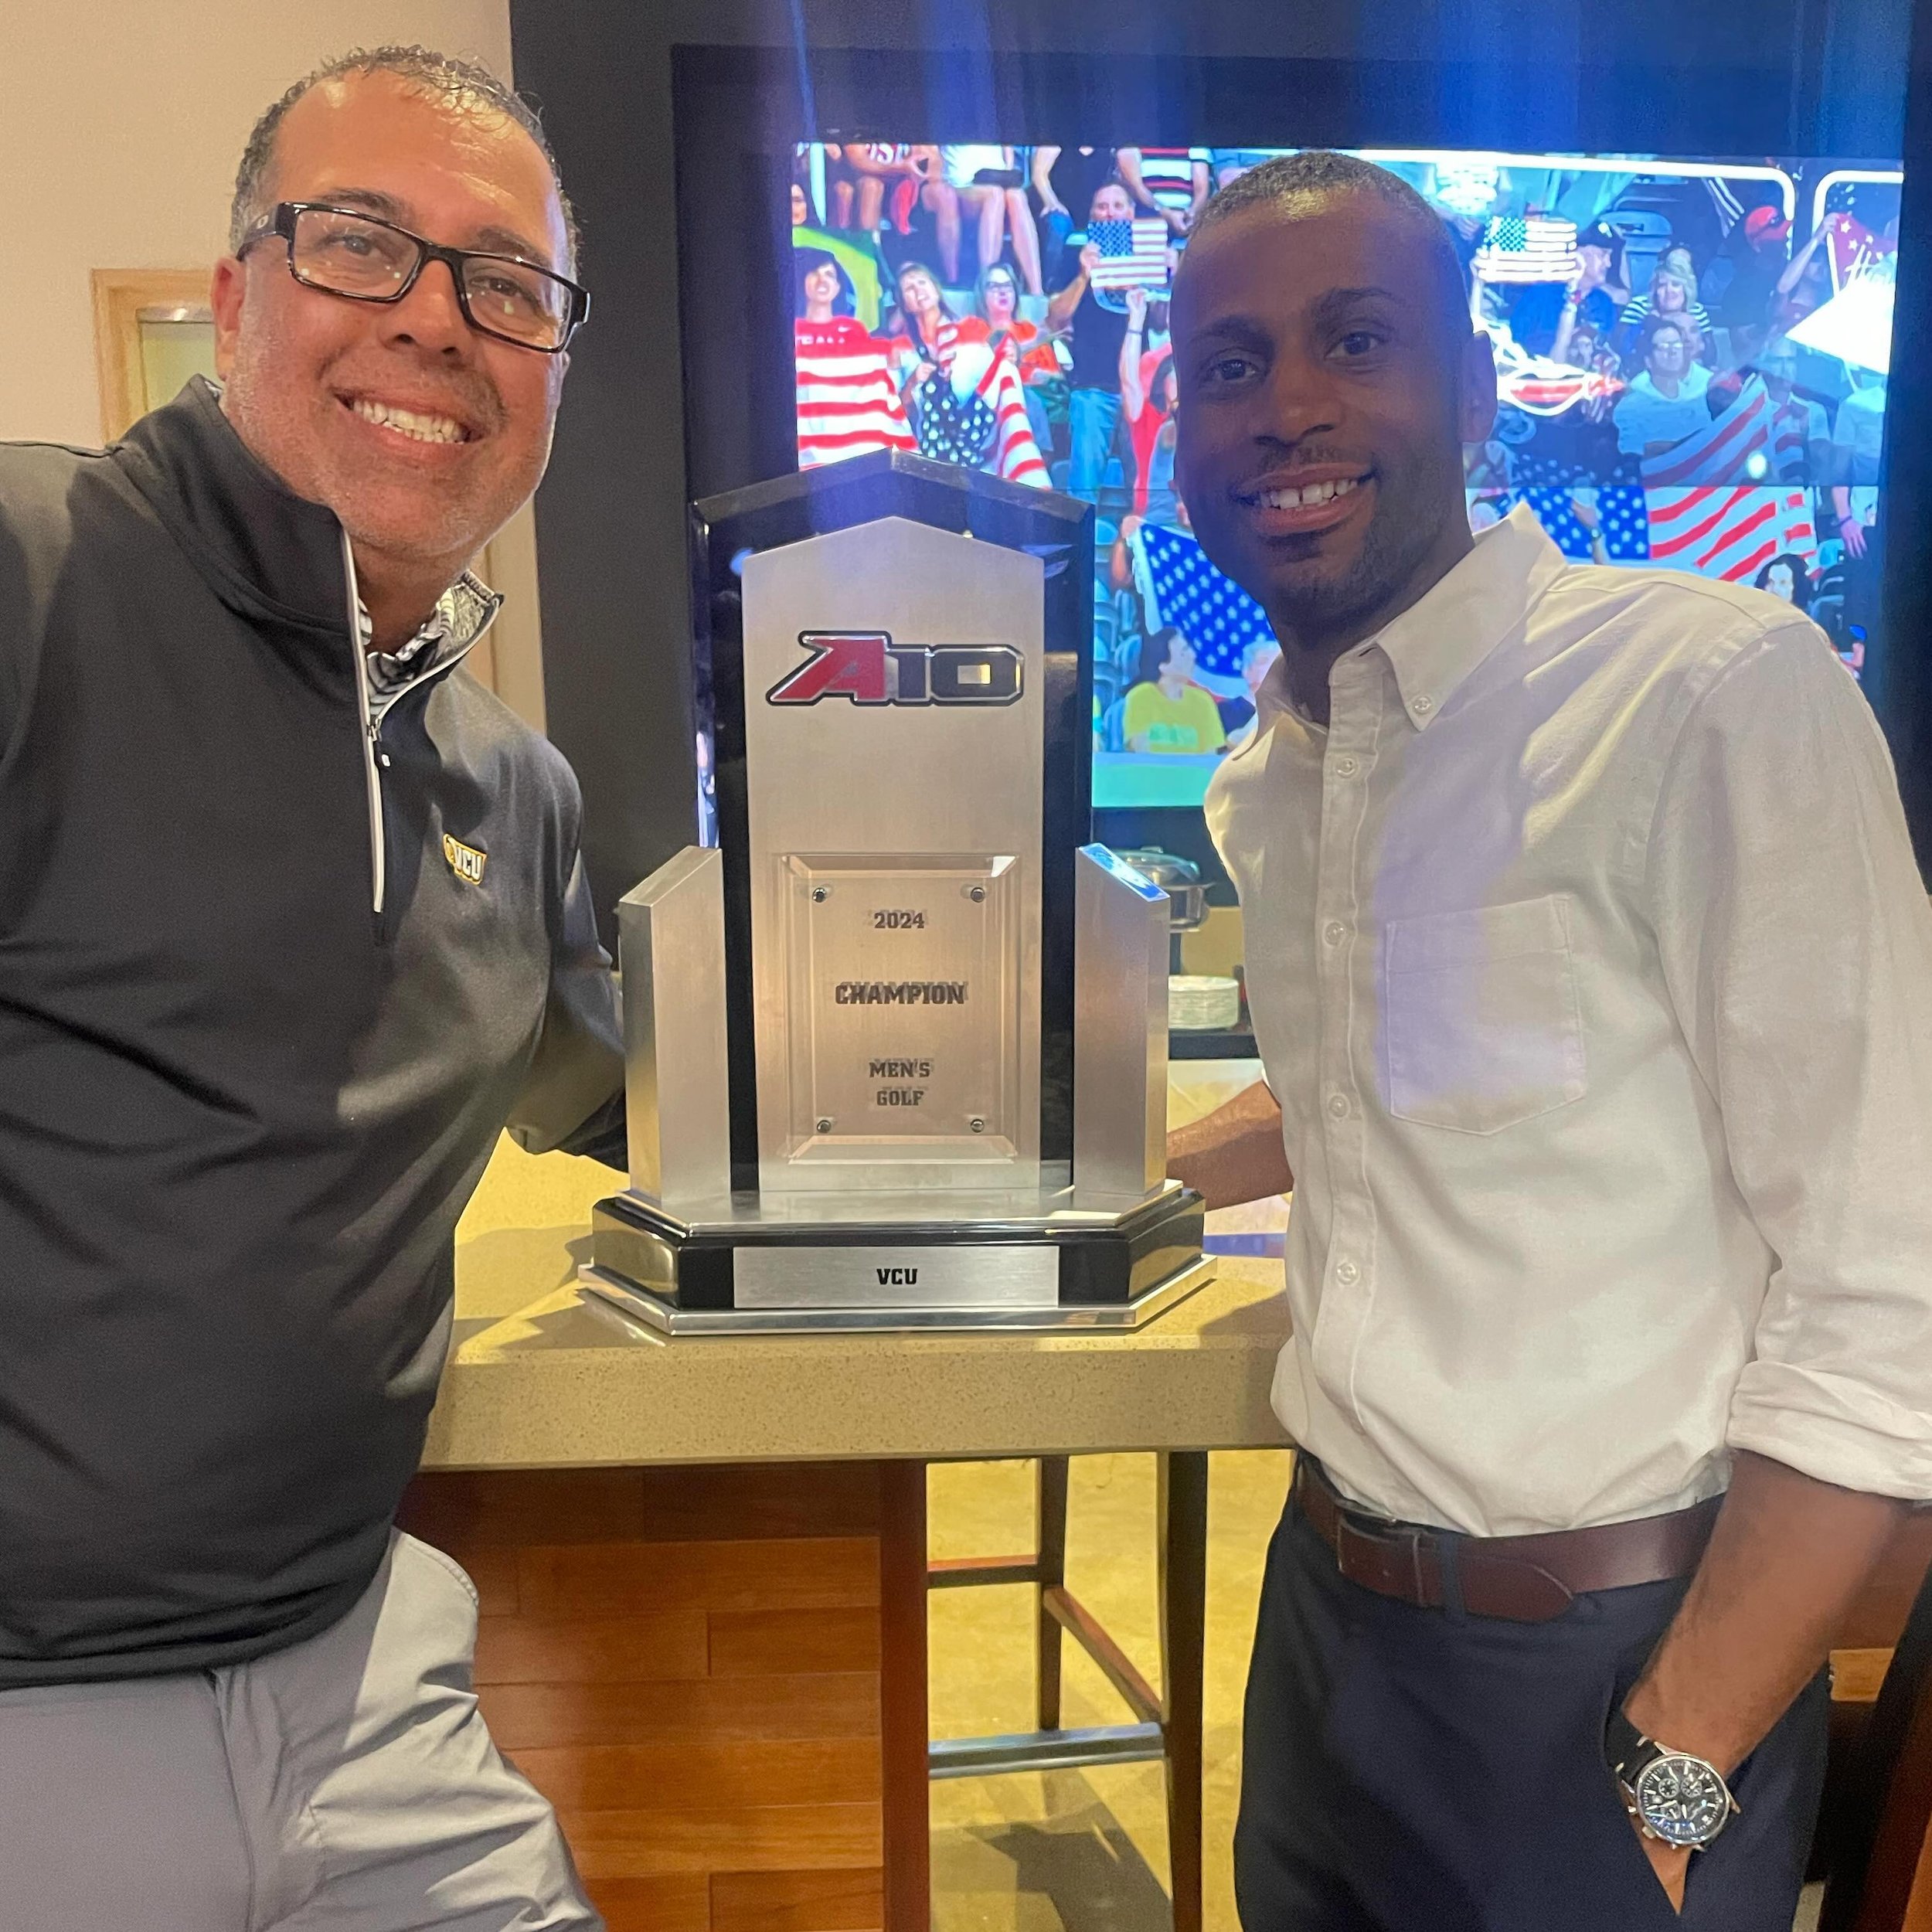 Had to pull up and show some love to @dublinegolf on an outstanding season for @vcugolf. #A10 Champions and Coach of the Year. Still working on my swing 🏌🏾&zwj;♂️🏌🏾&zwj;♂️